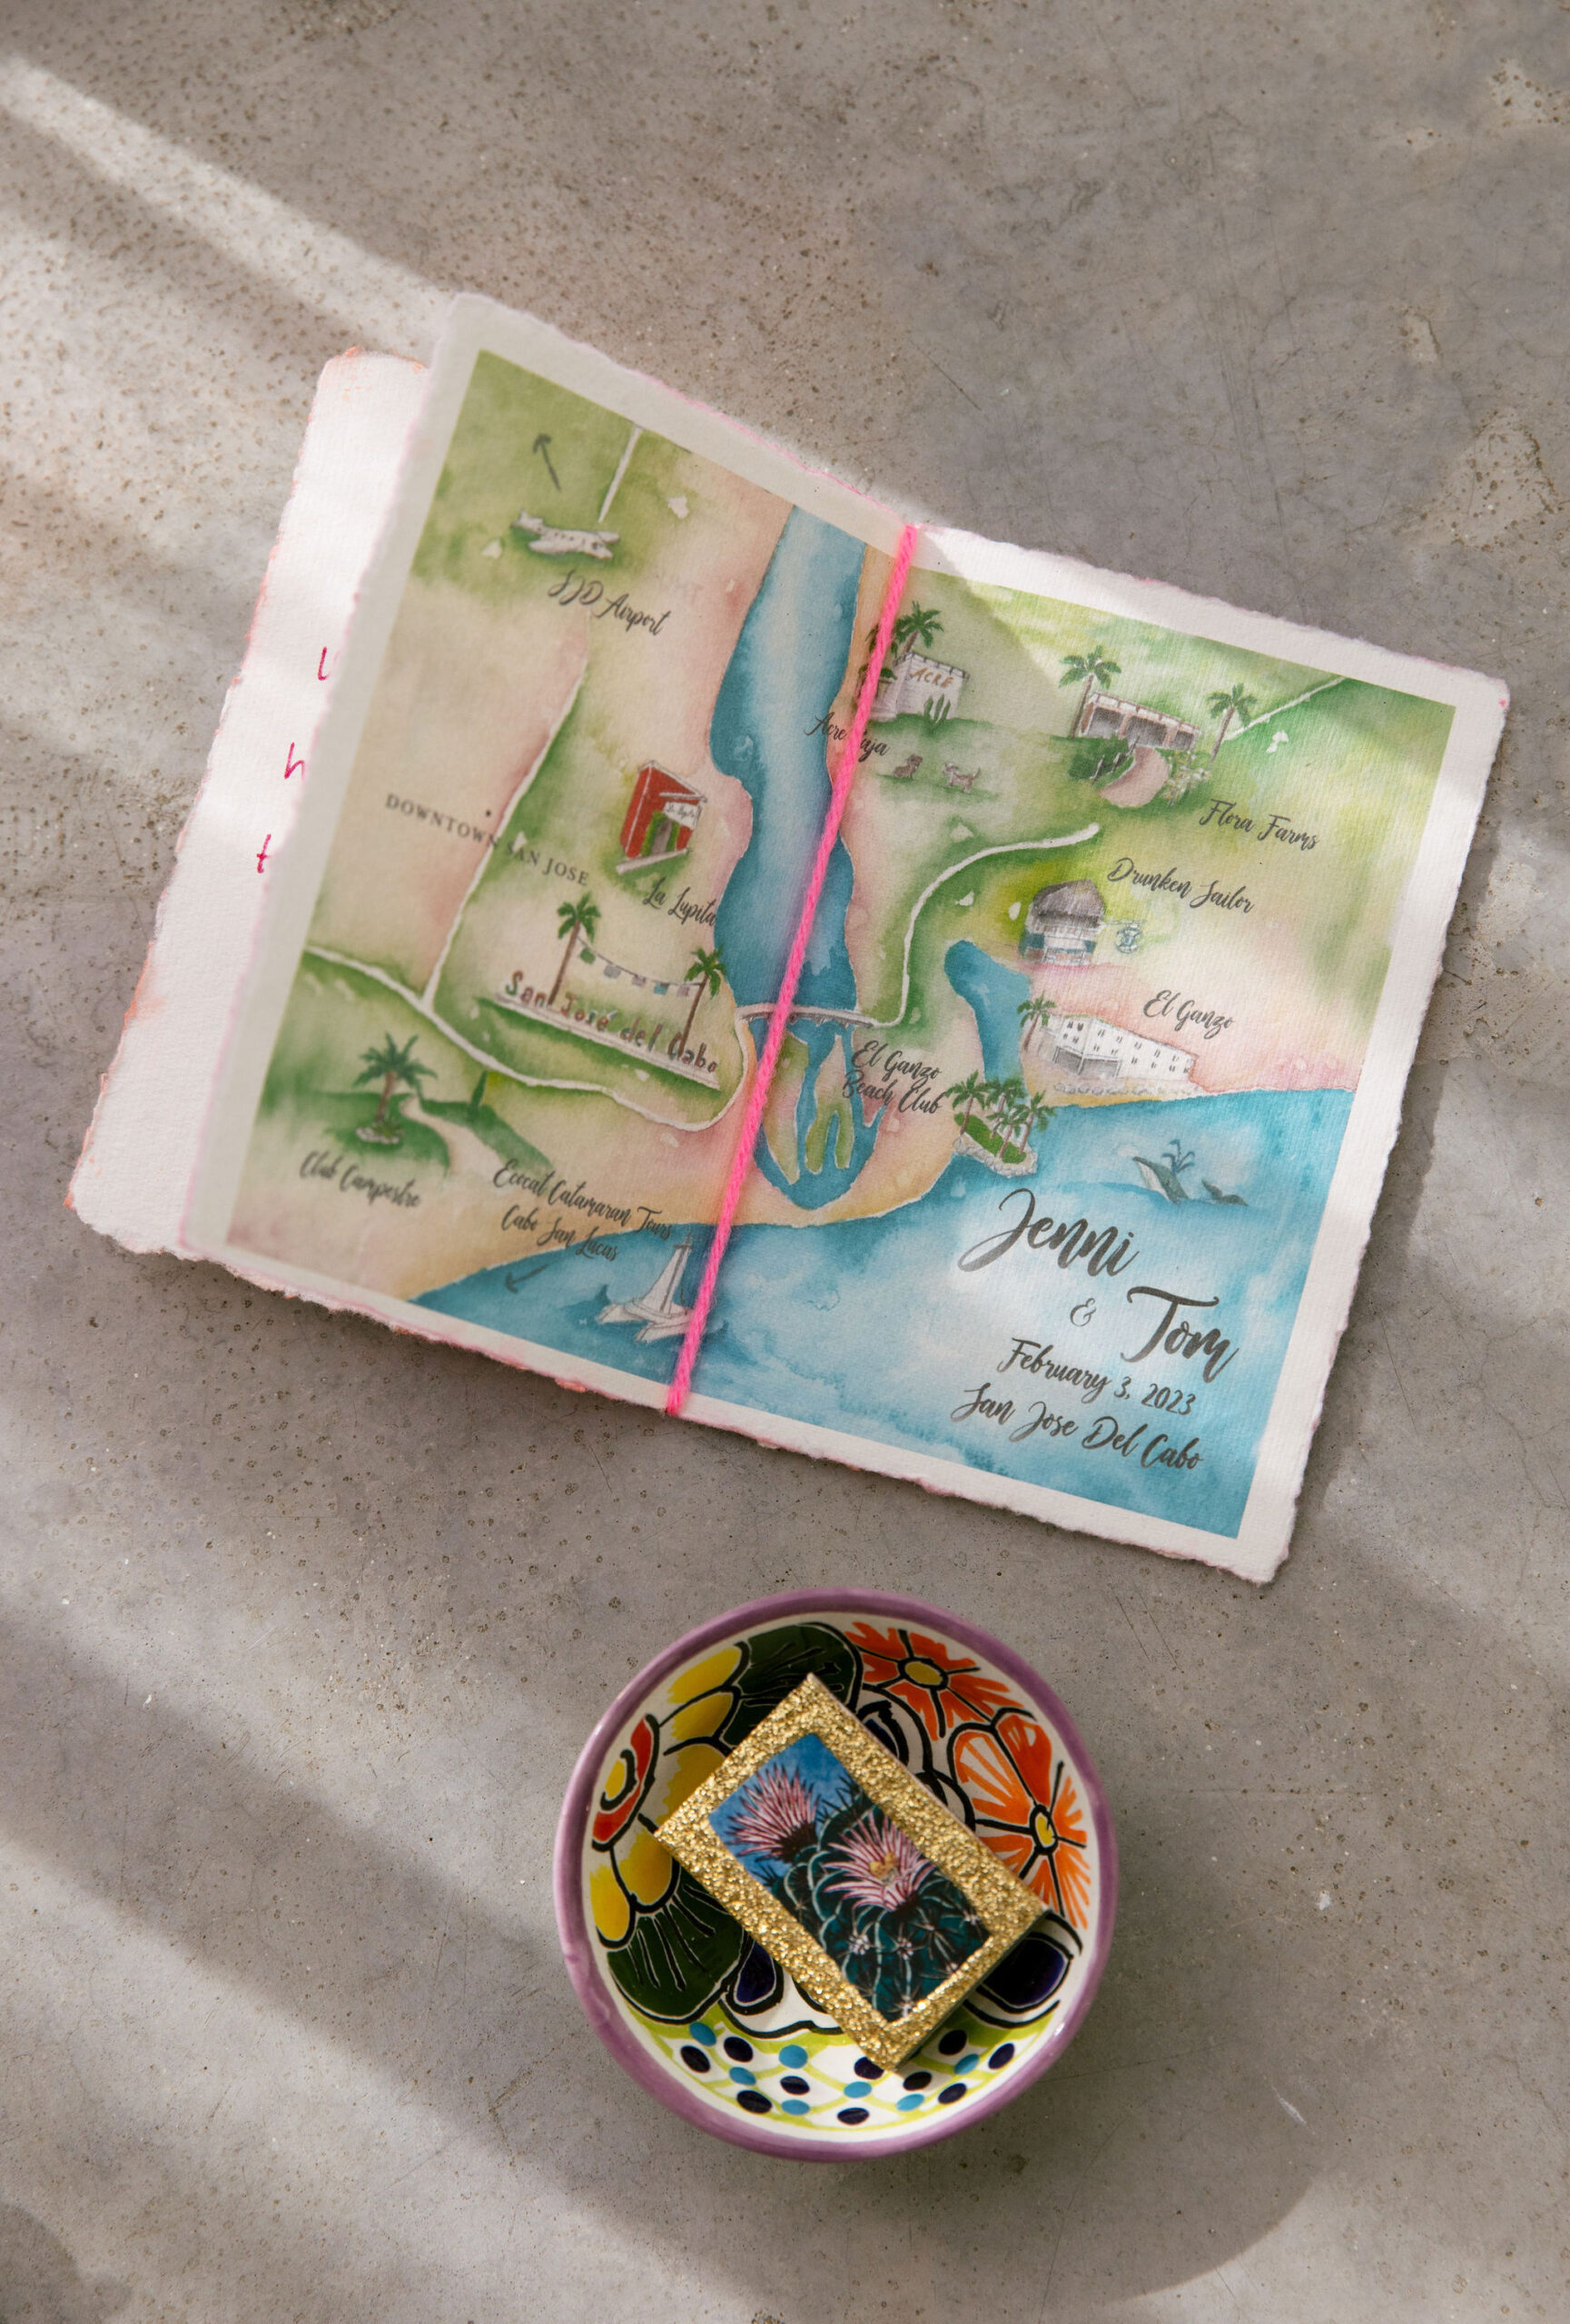 Custom hand painted map of San Jose Del Cabo wedding site. handcrafted ceramic Mexican dish with painted flowers and custom matchbook. Gold glittery matchbook with cactus art printed on box. Watercolor style art by Marketa F. Horton. 